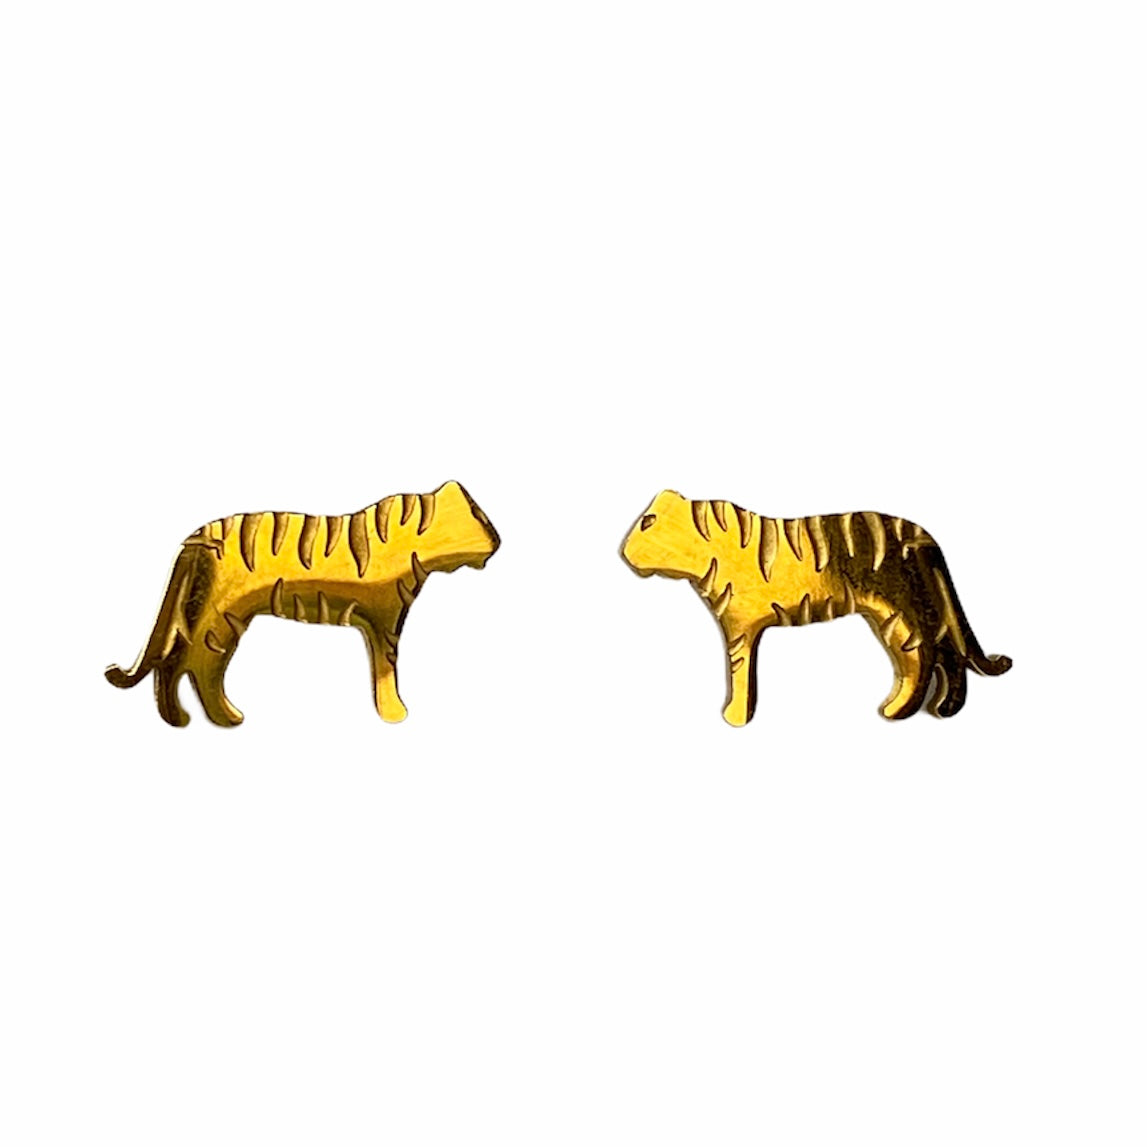 Tiger Earring Studs Gold